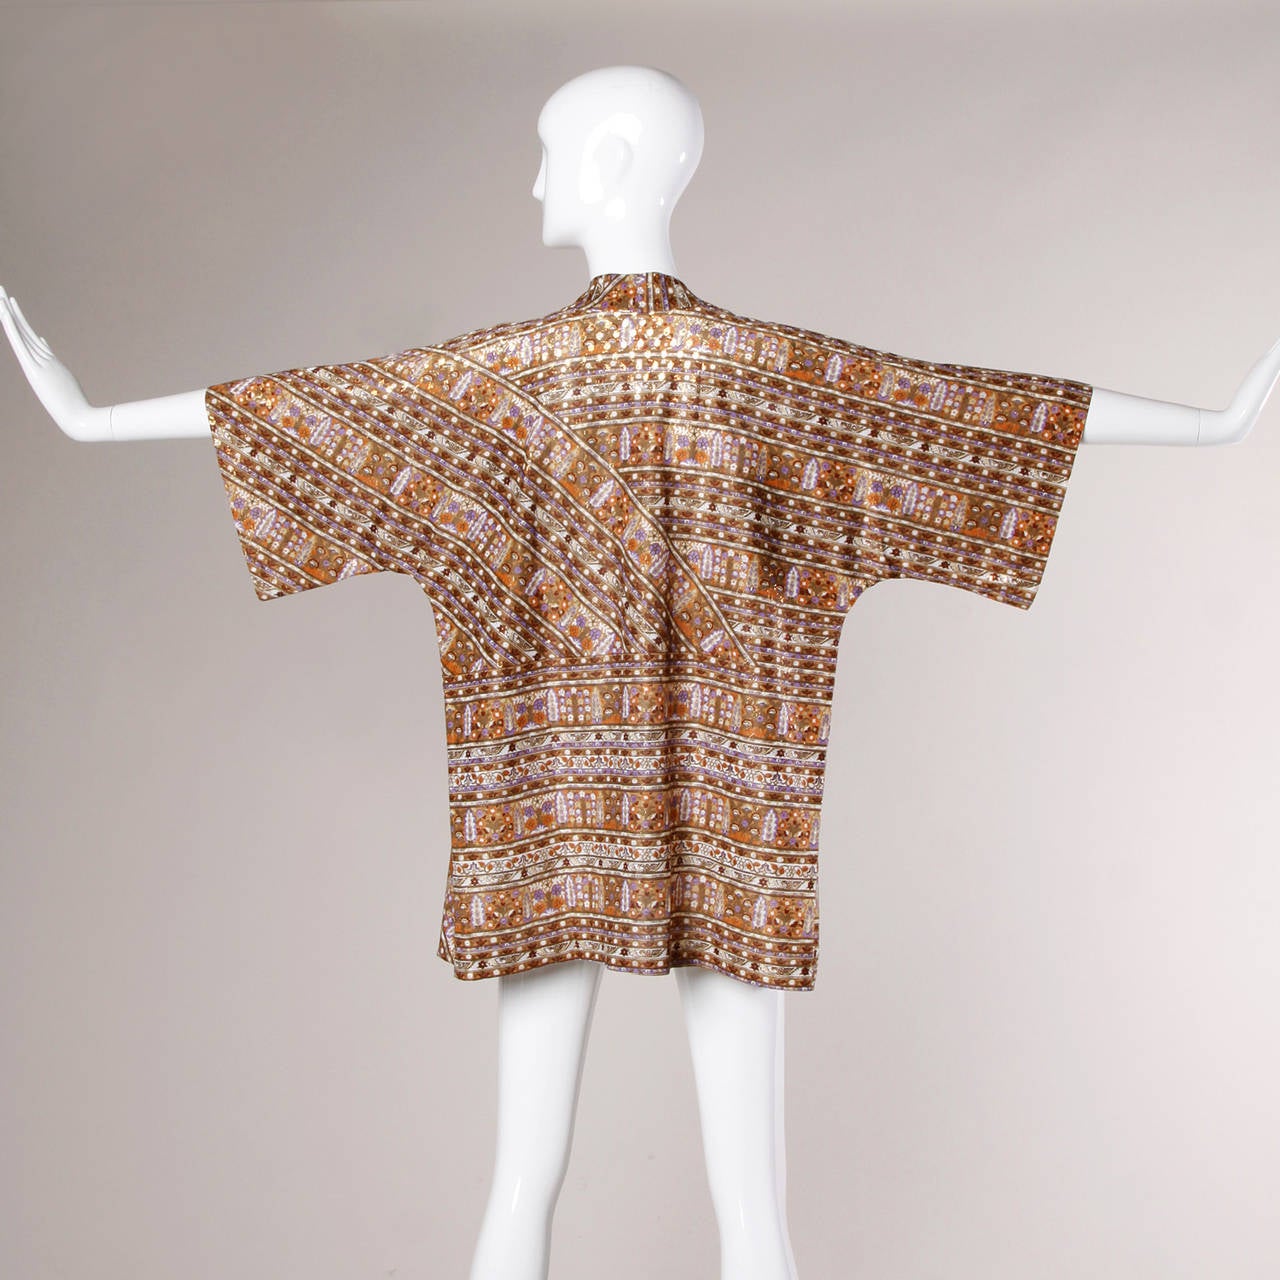 Egyptian-inspired vintage metallic kimono jacket by Mr. Blackwell.

Details:

Unlined
No Closure
Circa: 1970's
Estimated Size: Free
Color: Gold Metallic/ Lavender/ Rust/ White
Fabric: Not Marked
Label: Mr.